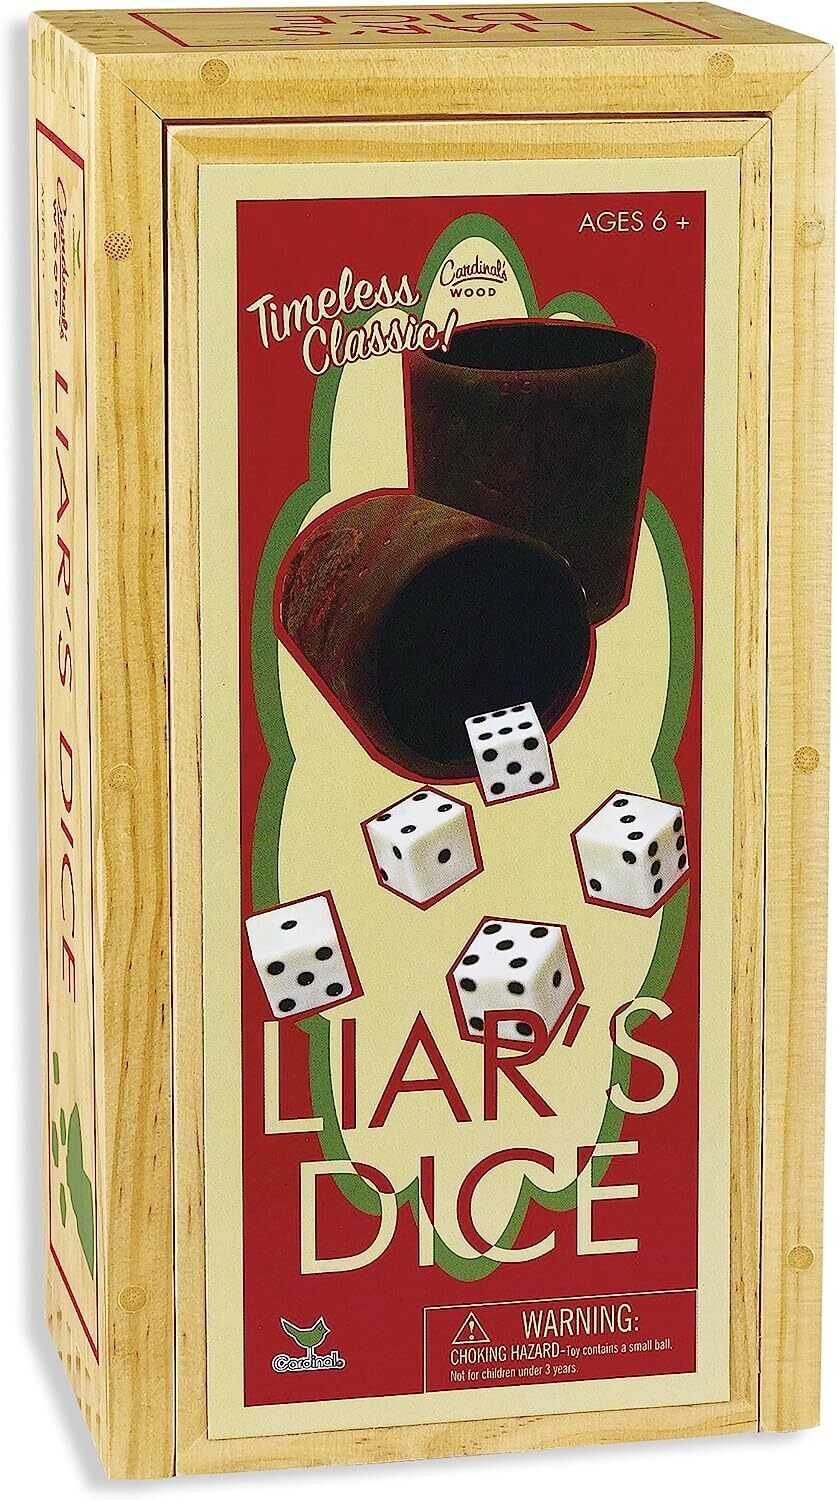 Cardinal Games Liars Dice in Wood Box Retro Game - Little Kids Business